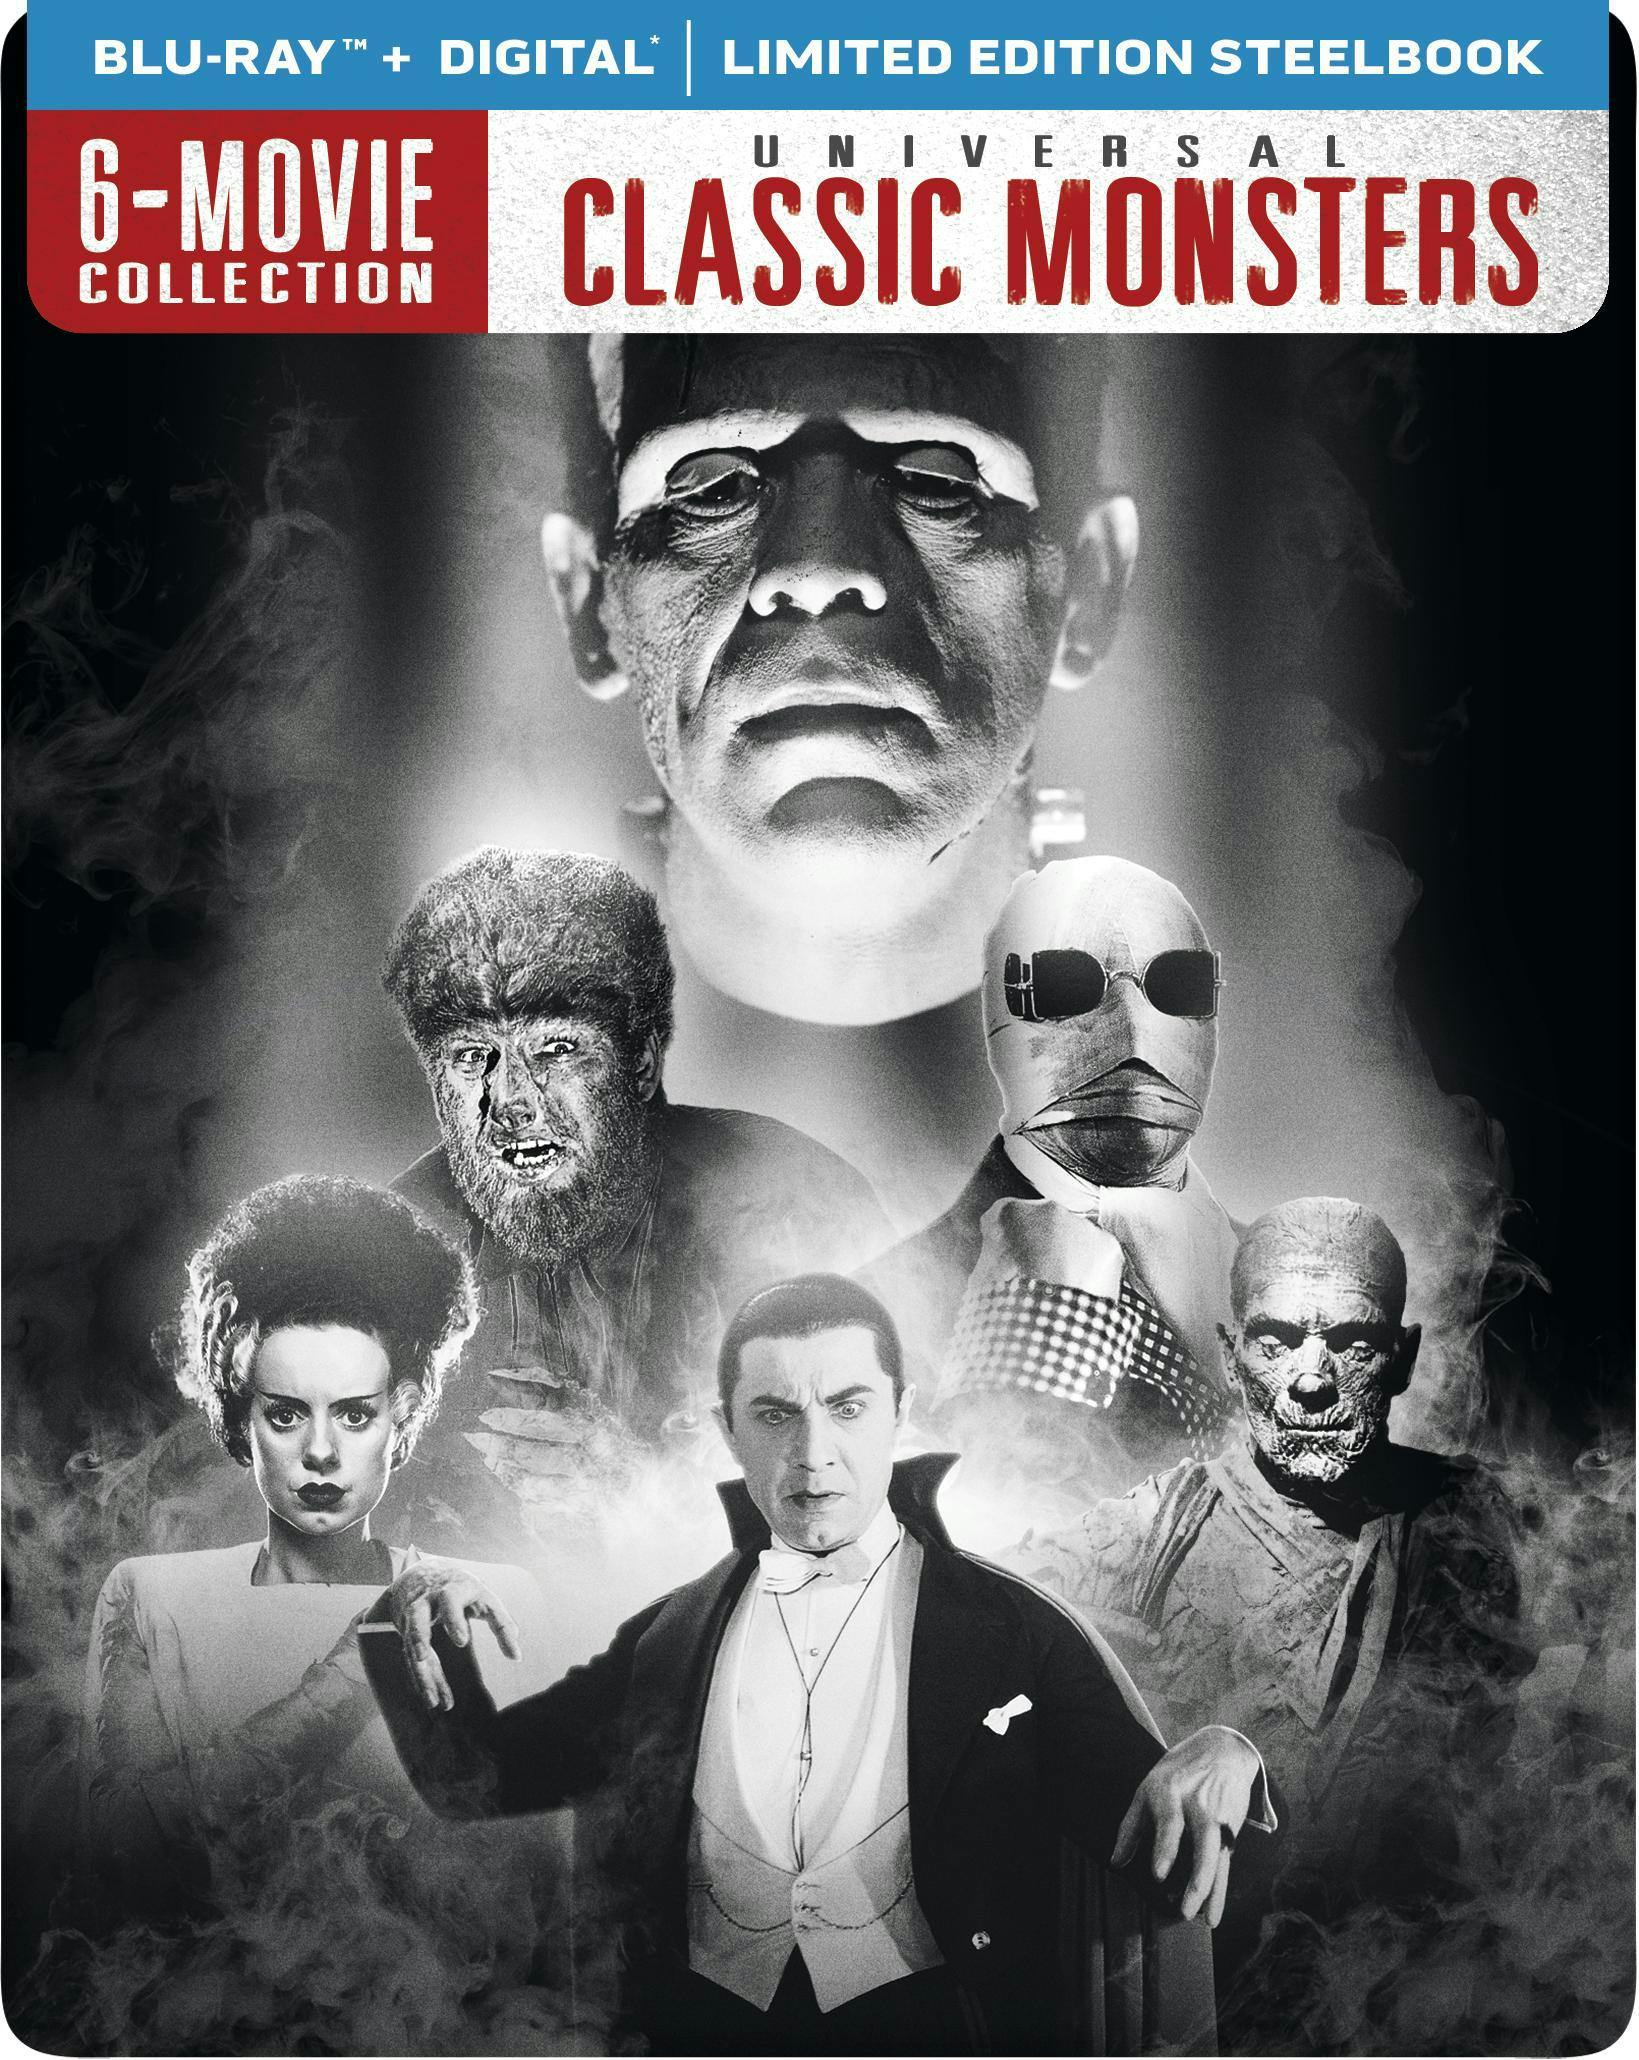 Buy Universal Classic Monsters Collection Box Set (Steelbook) Blu